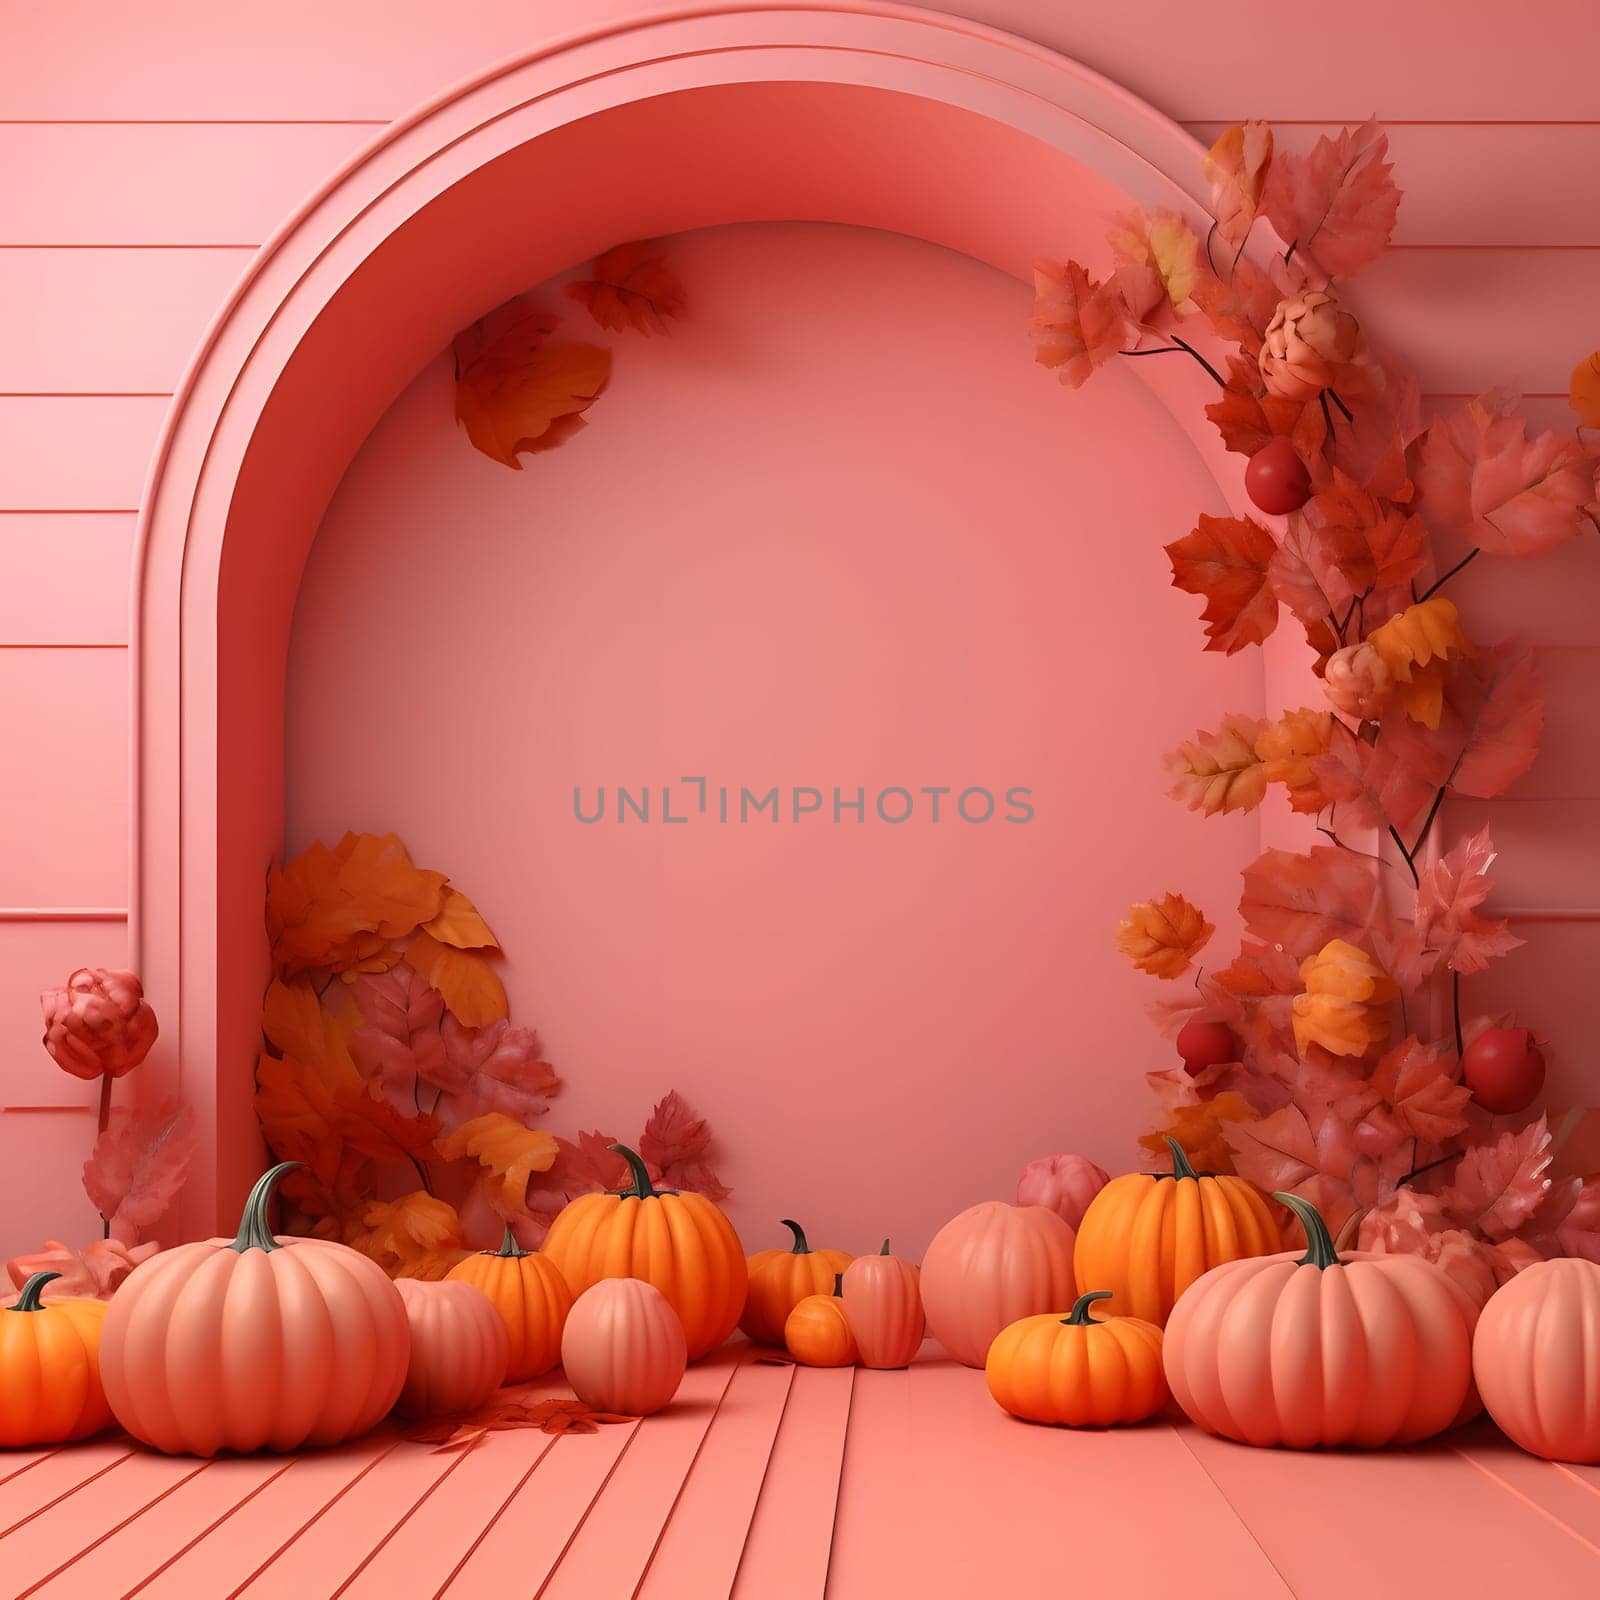 Elegant scenery with pumpkins and autumn leaves. Pink color. Pumpkin as a dish of thanksgiving for the harvest. by ThemesS